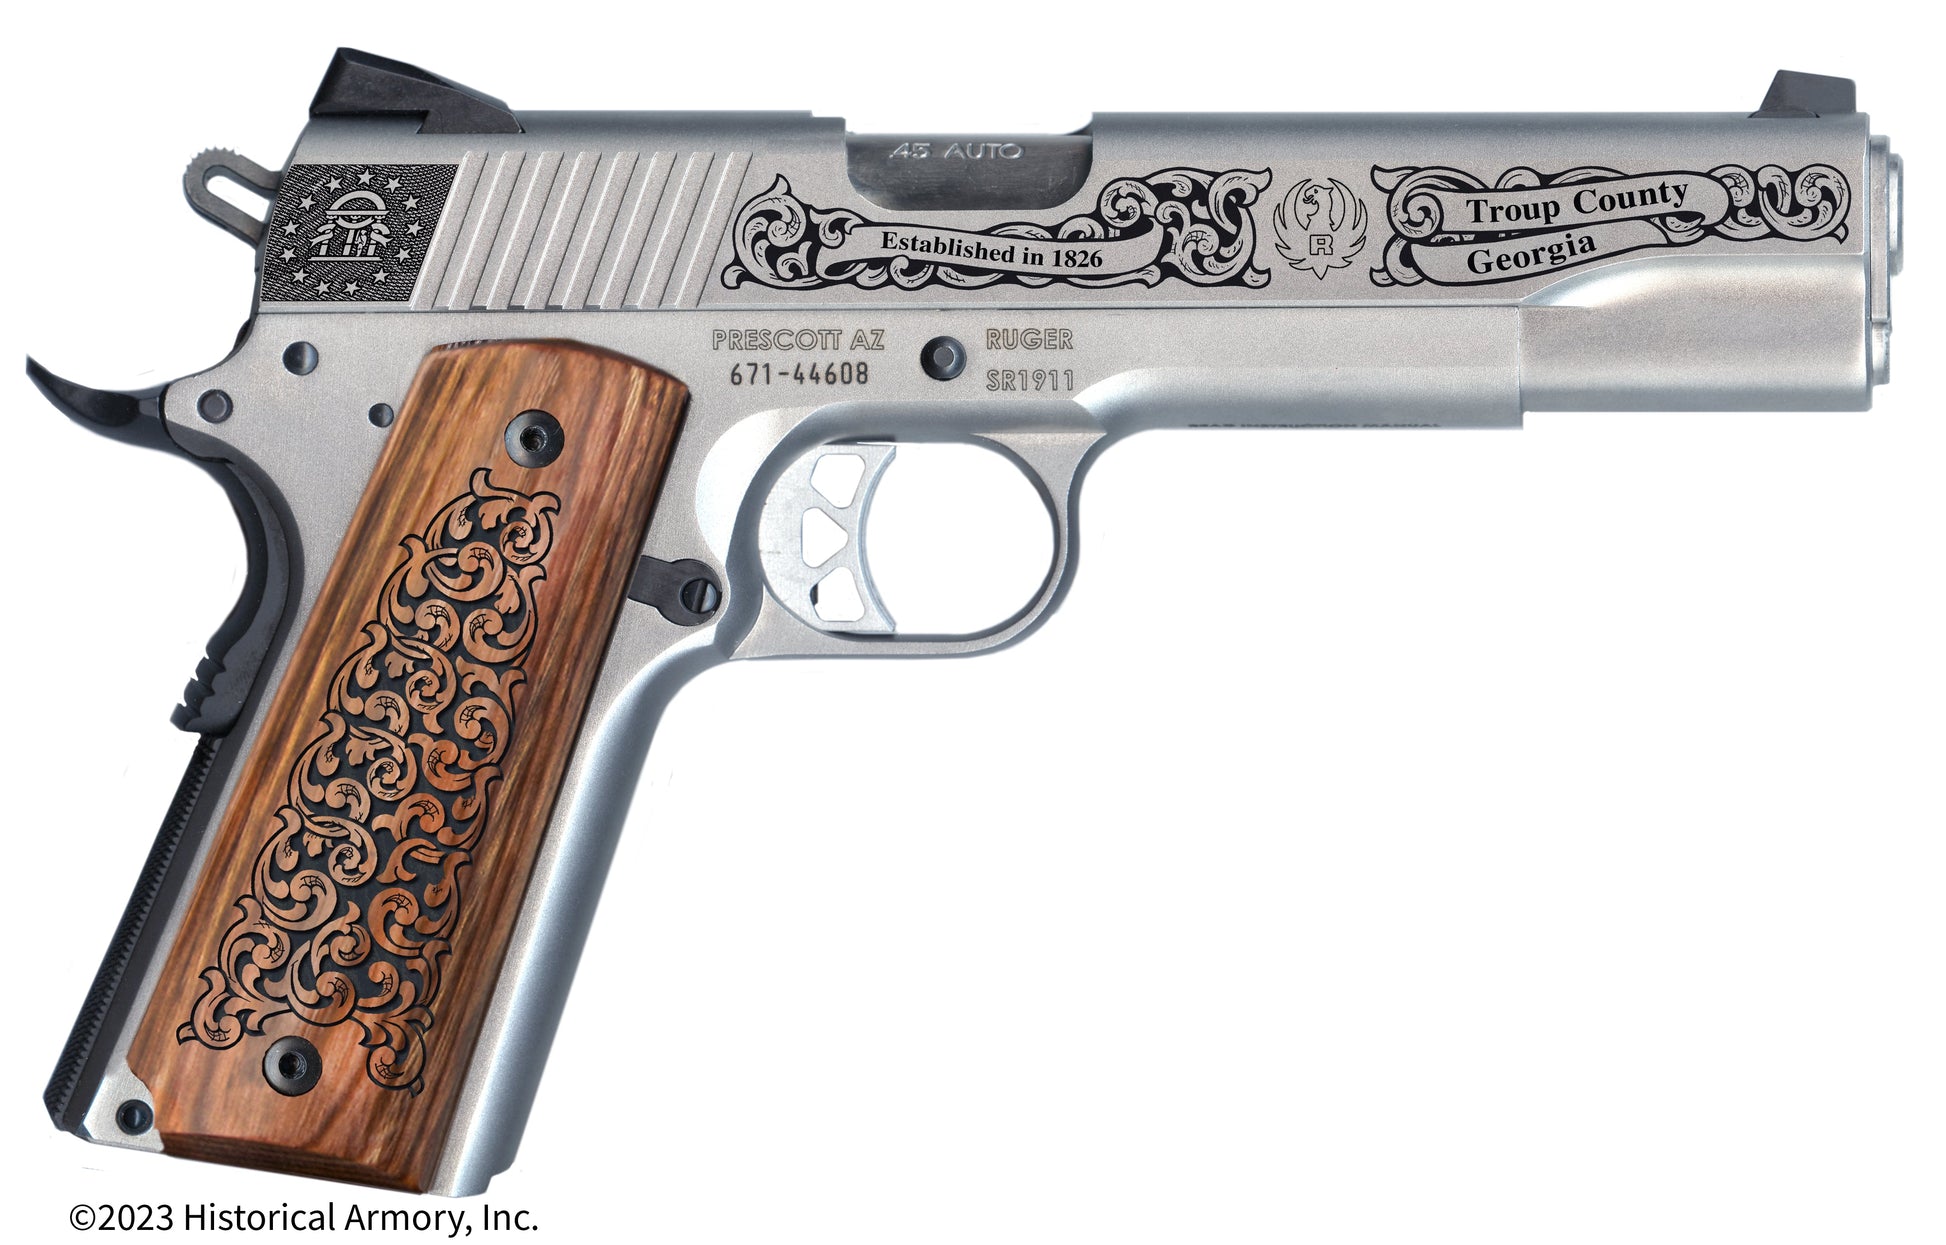 Troup County Georgia Engraved .45 Auto Ruger 1911